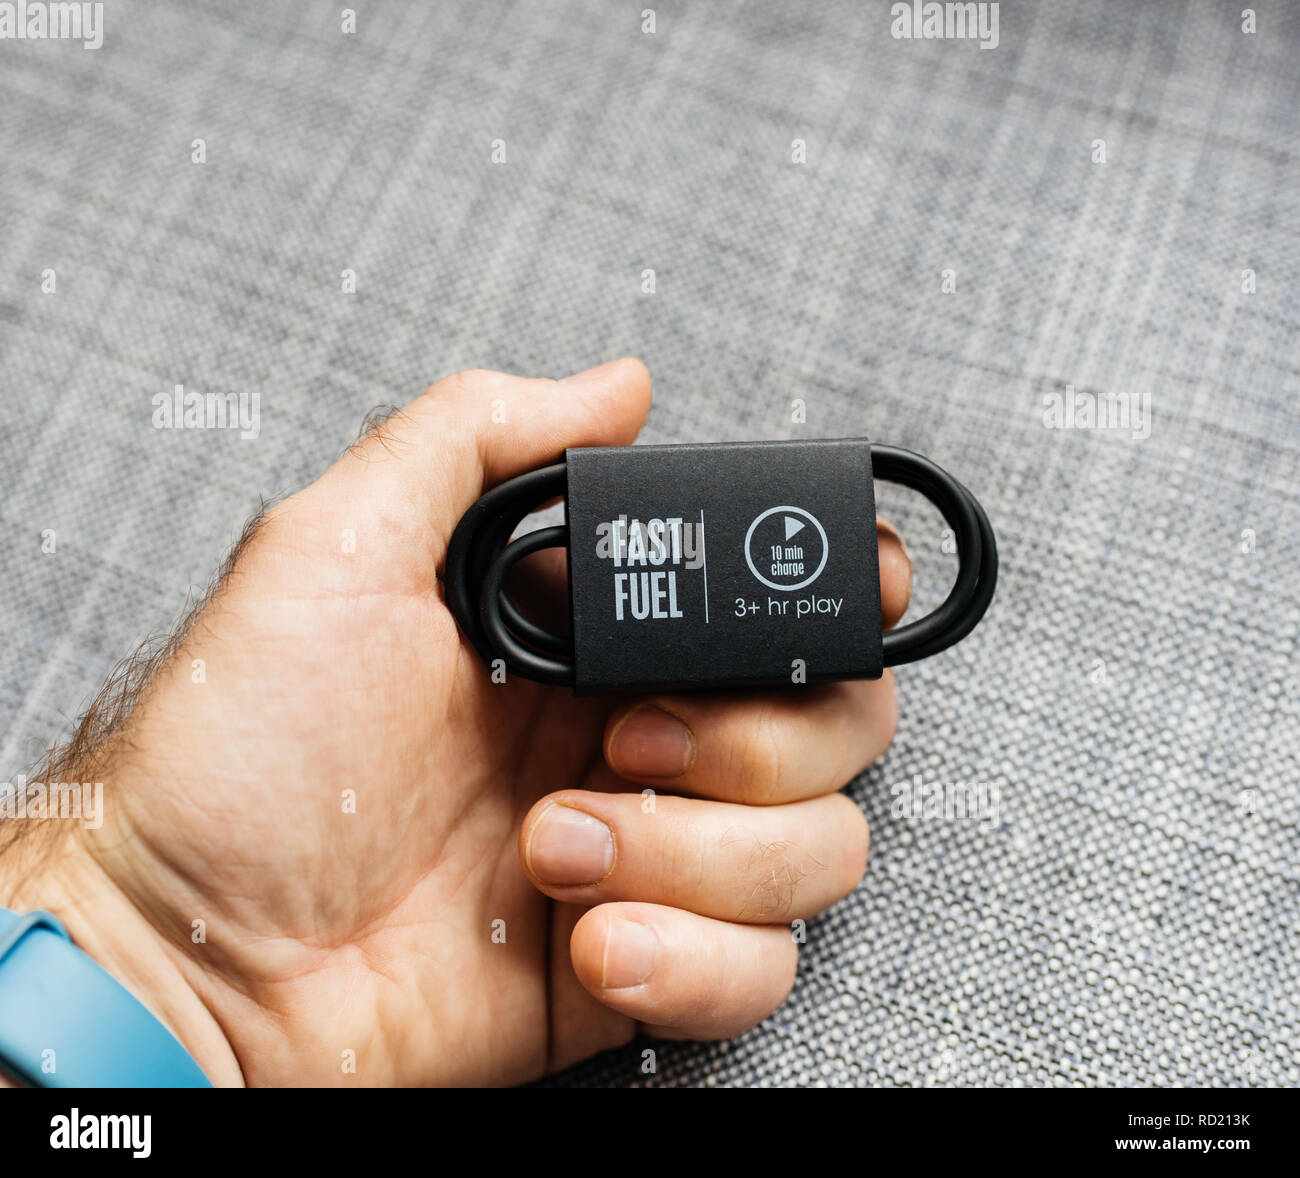 PARIS, FRANCE - MAR 31, 2018: Man unboxing new Apple Beats By Dr Dre Beats Studio 3 Wireless headphones with Pure Adaptive Noise Canceling Pure ANC - fast fuel sign on the connection charging cable Stock Photo